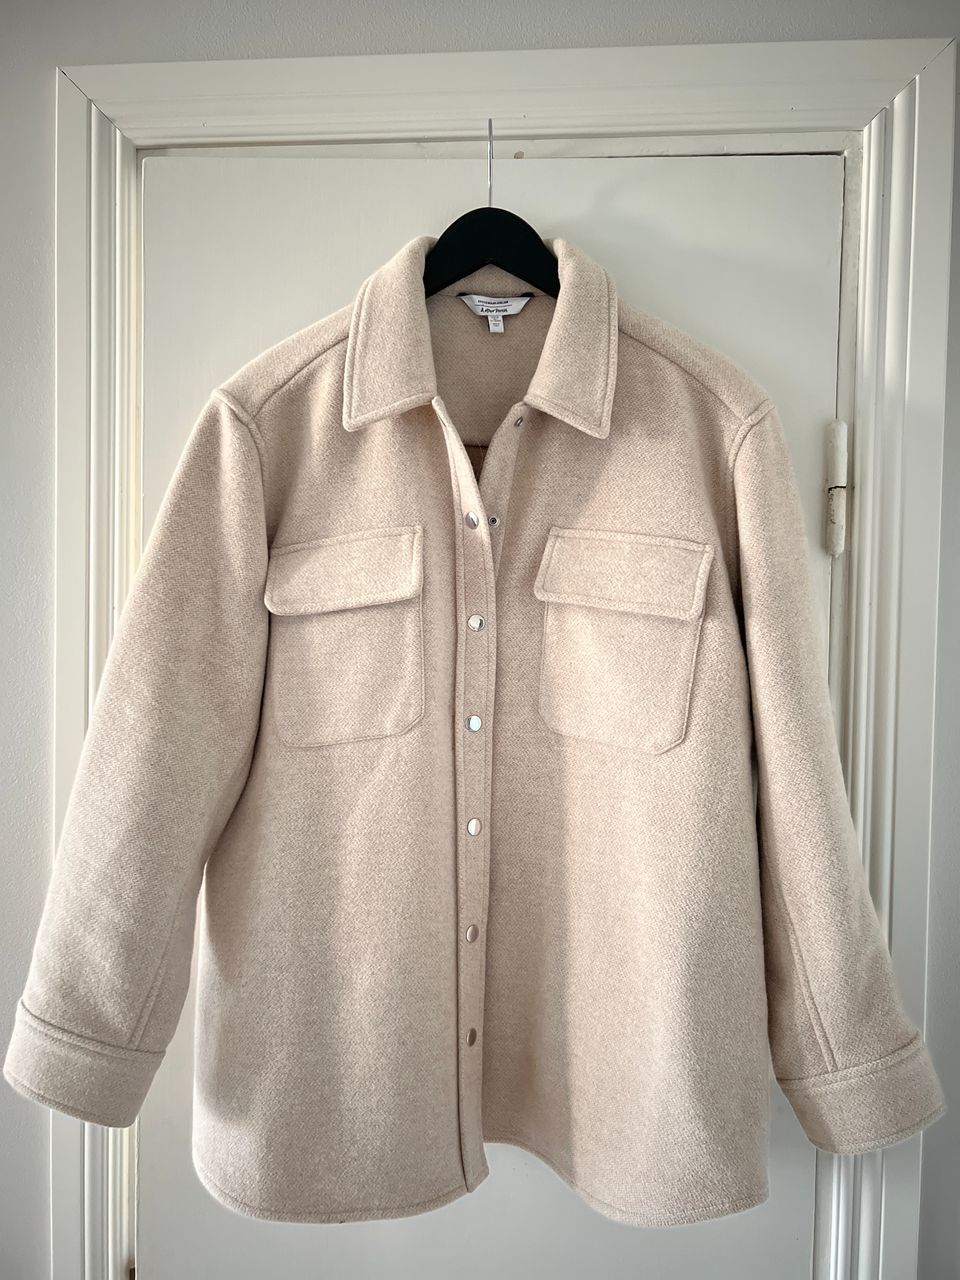 & Other Stories oversized wool blend overshirt